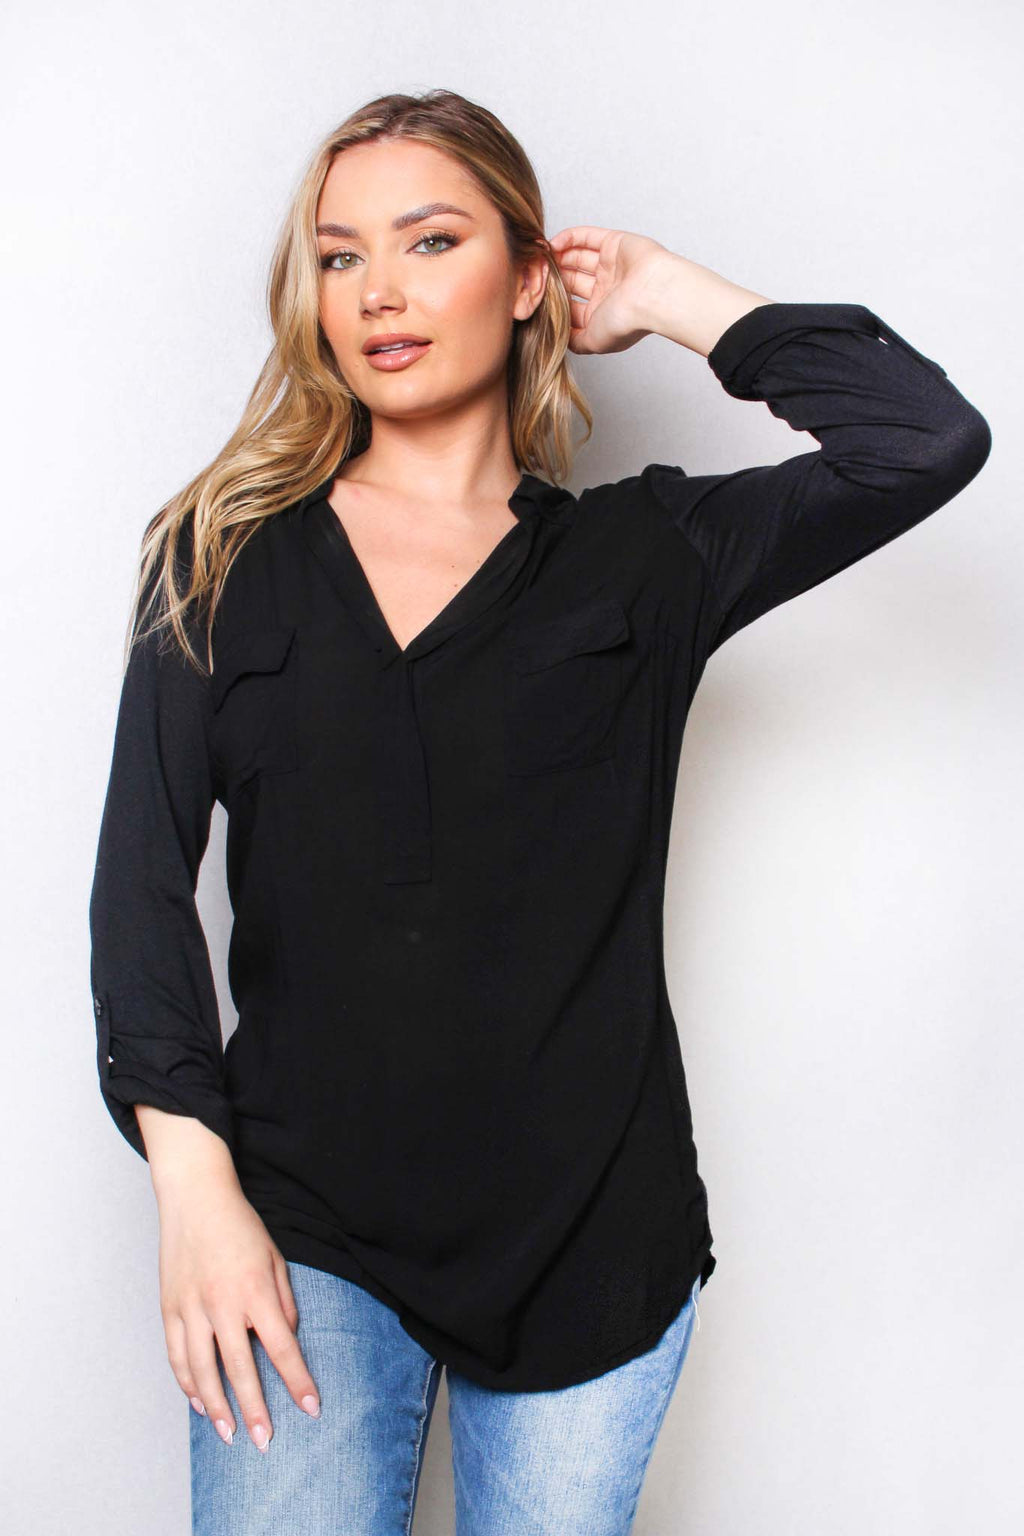 Women's Long Sleeve Collared Double Pocket Top